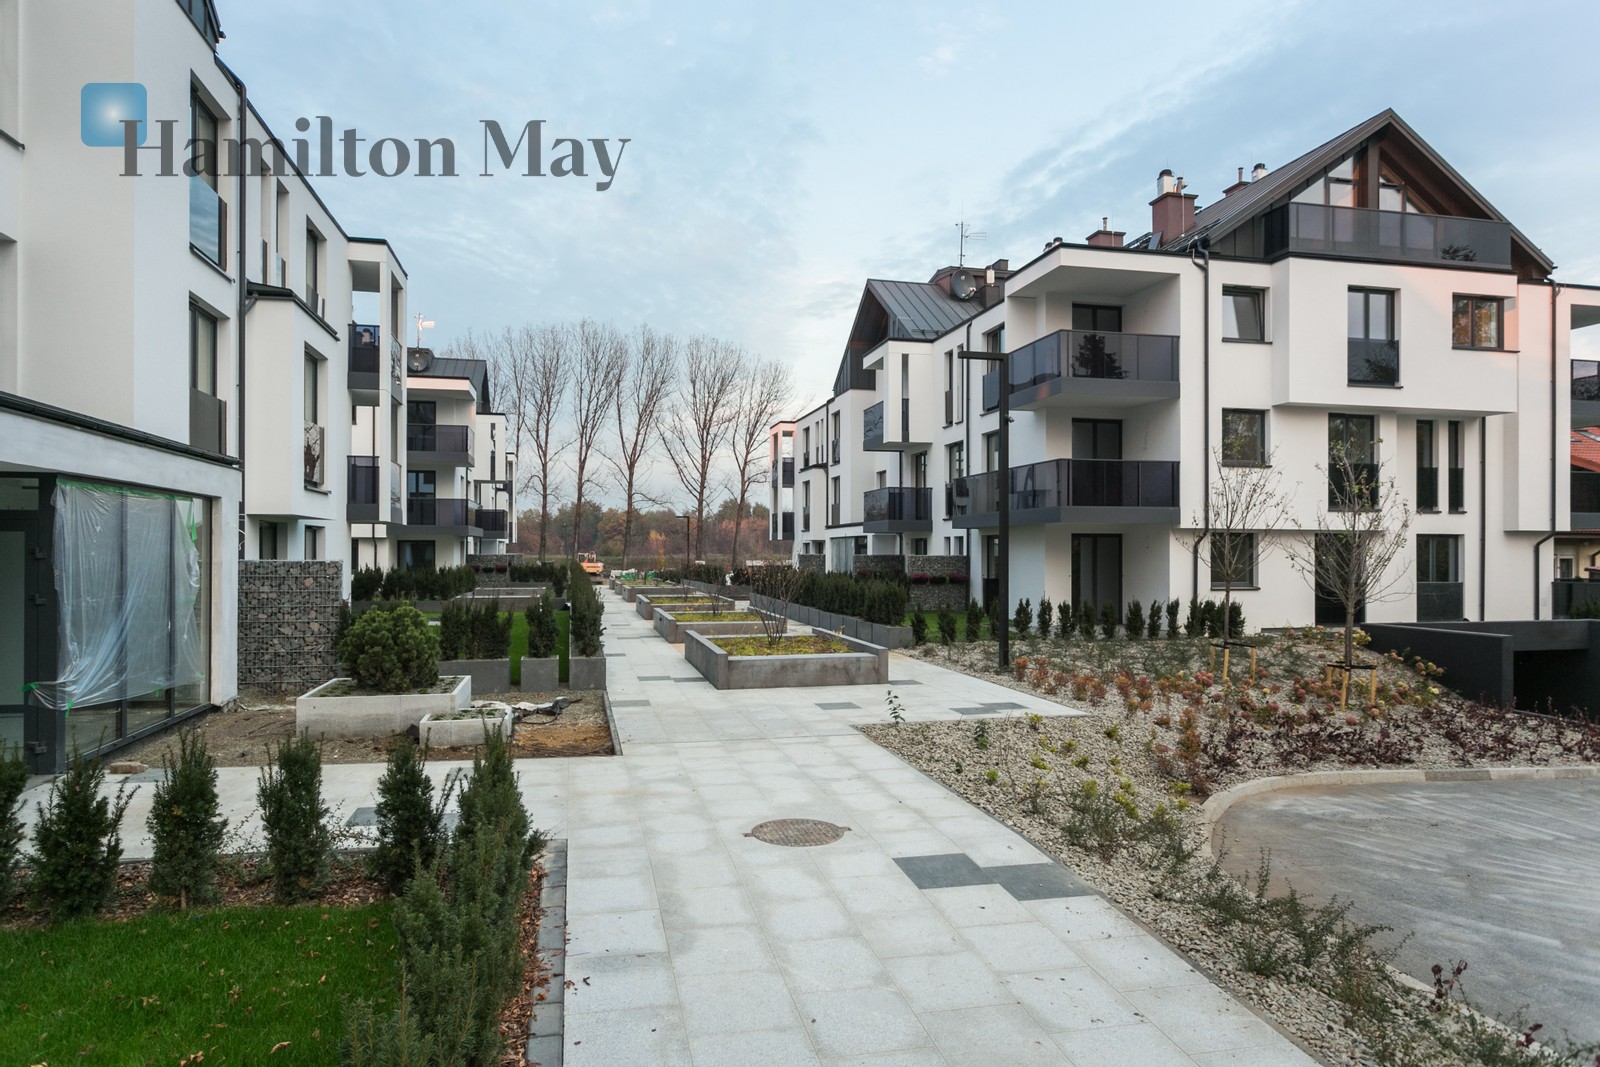 Subregion: Wola Justowska Level: 3 Status: existing Number of units: 60 Sale price from: 413900PLN Avg. sales price/m2: 10600PLN Rental price from: nullPLN Avg. rental price/m2: nullPLN - slider